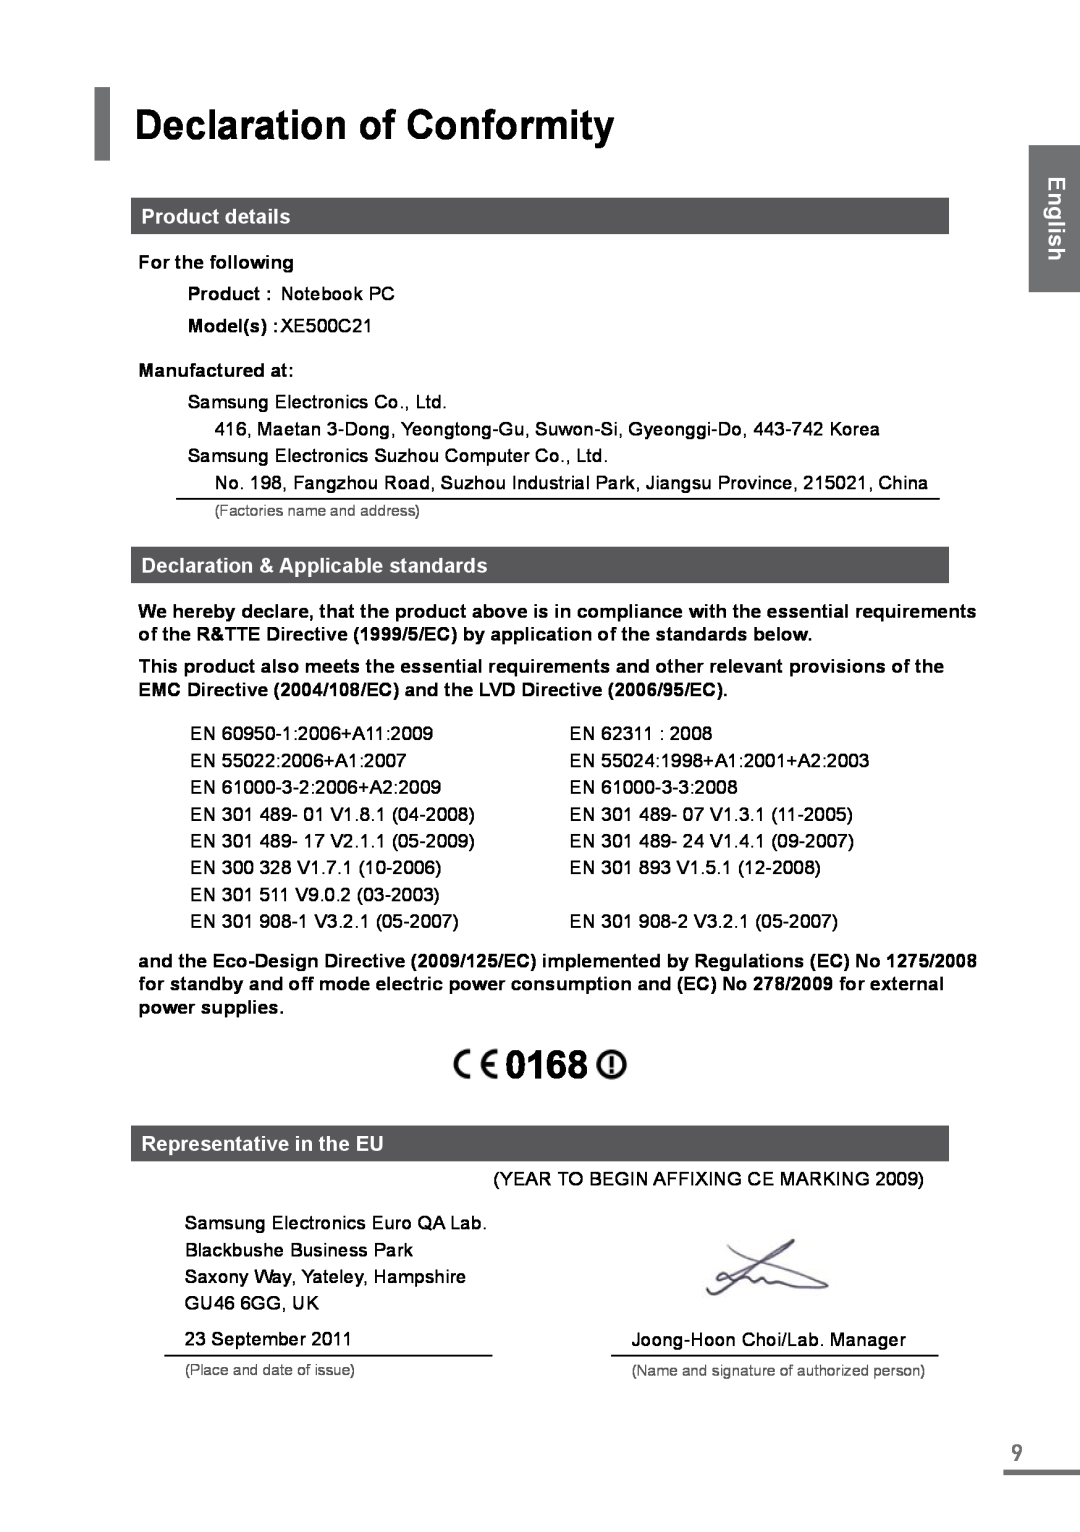 Samsung XE500C21-HZ2FR Declaration of Conformity, Product details, Declaration & Applicable standards, For the following 